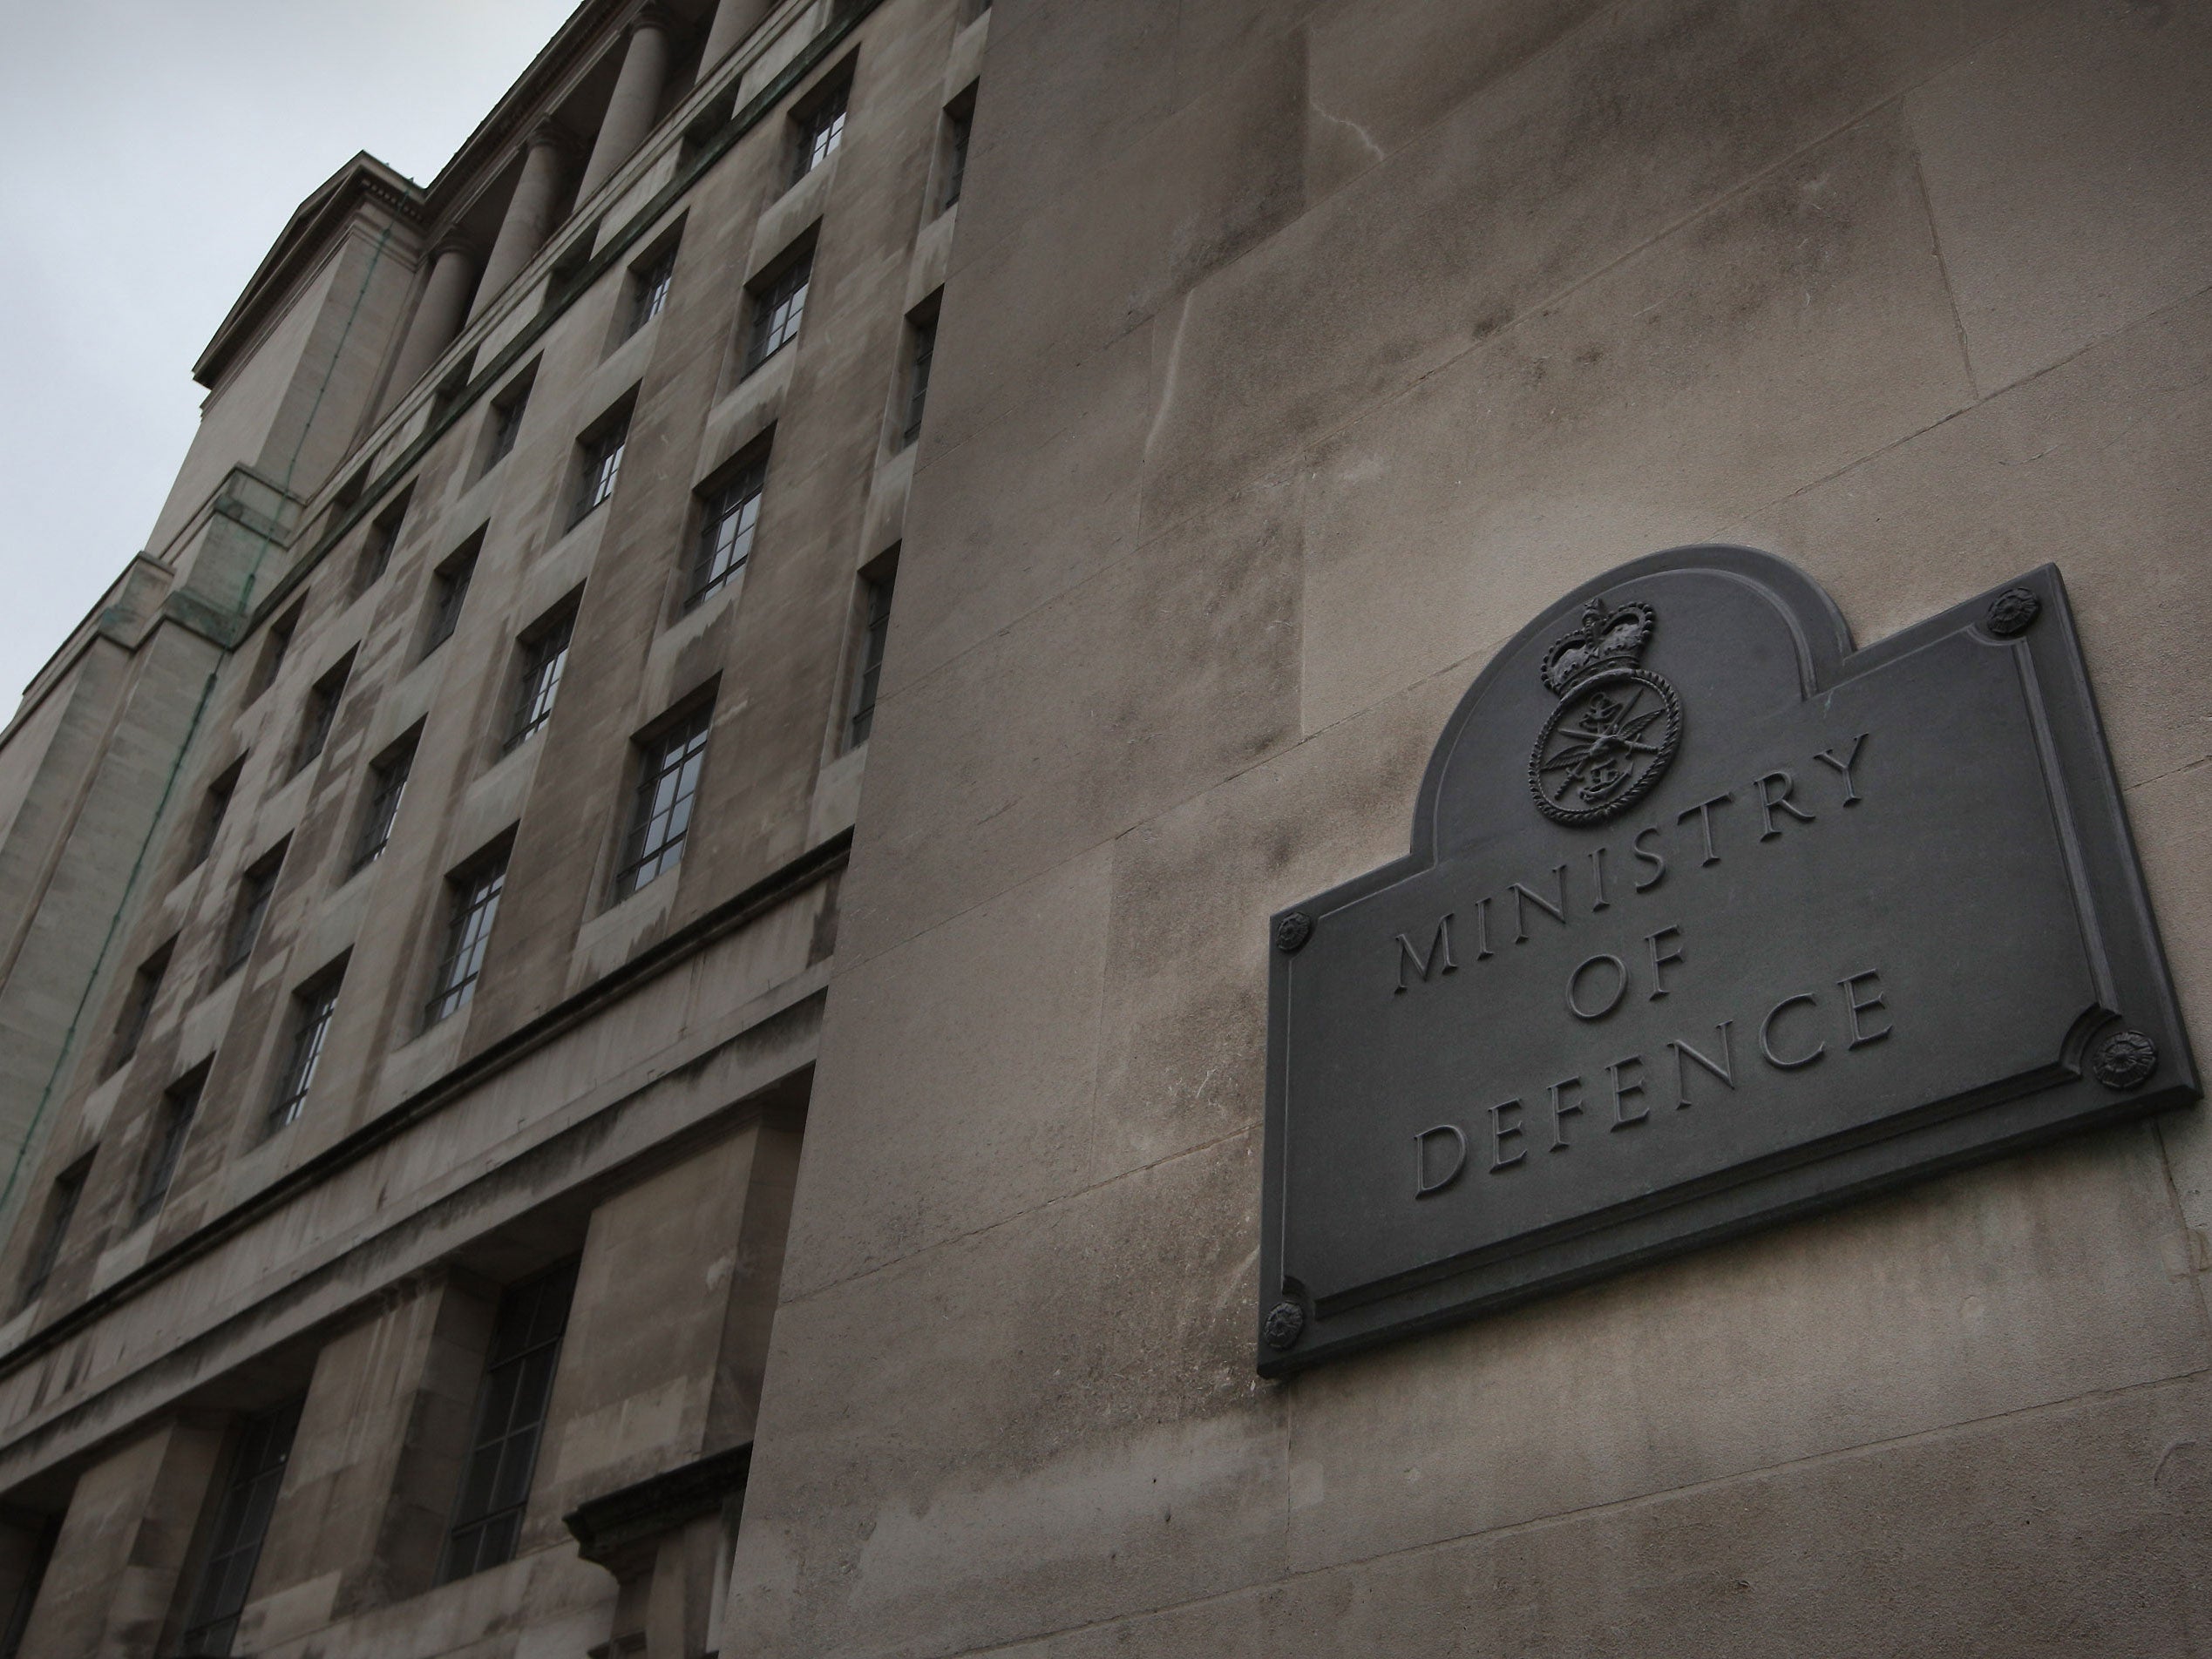 The Ministry of Defence is paying up to £30m a year for properties that are unoccupied, the National Audit Office said